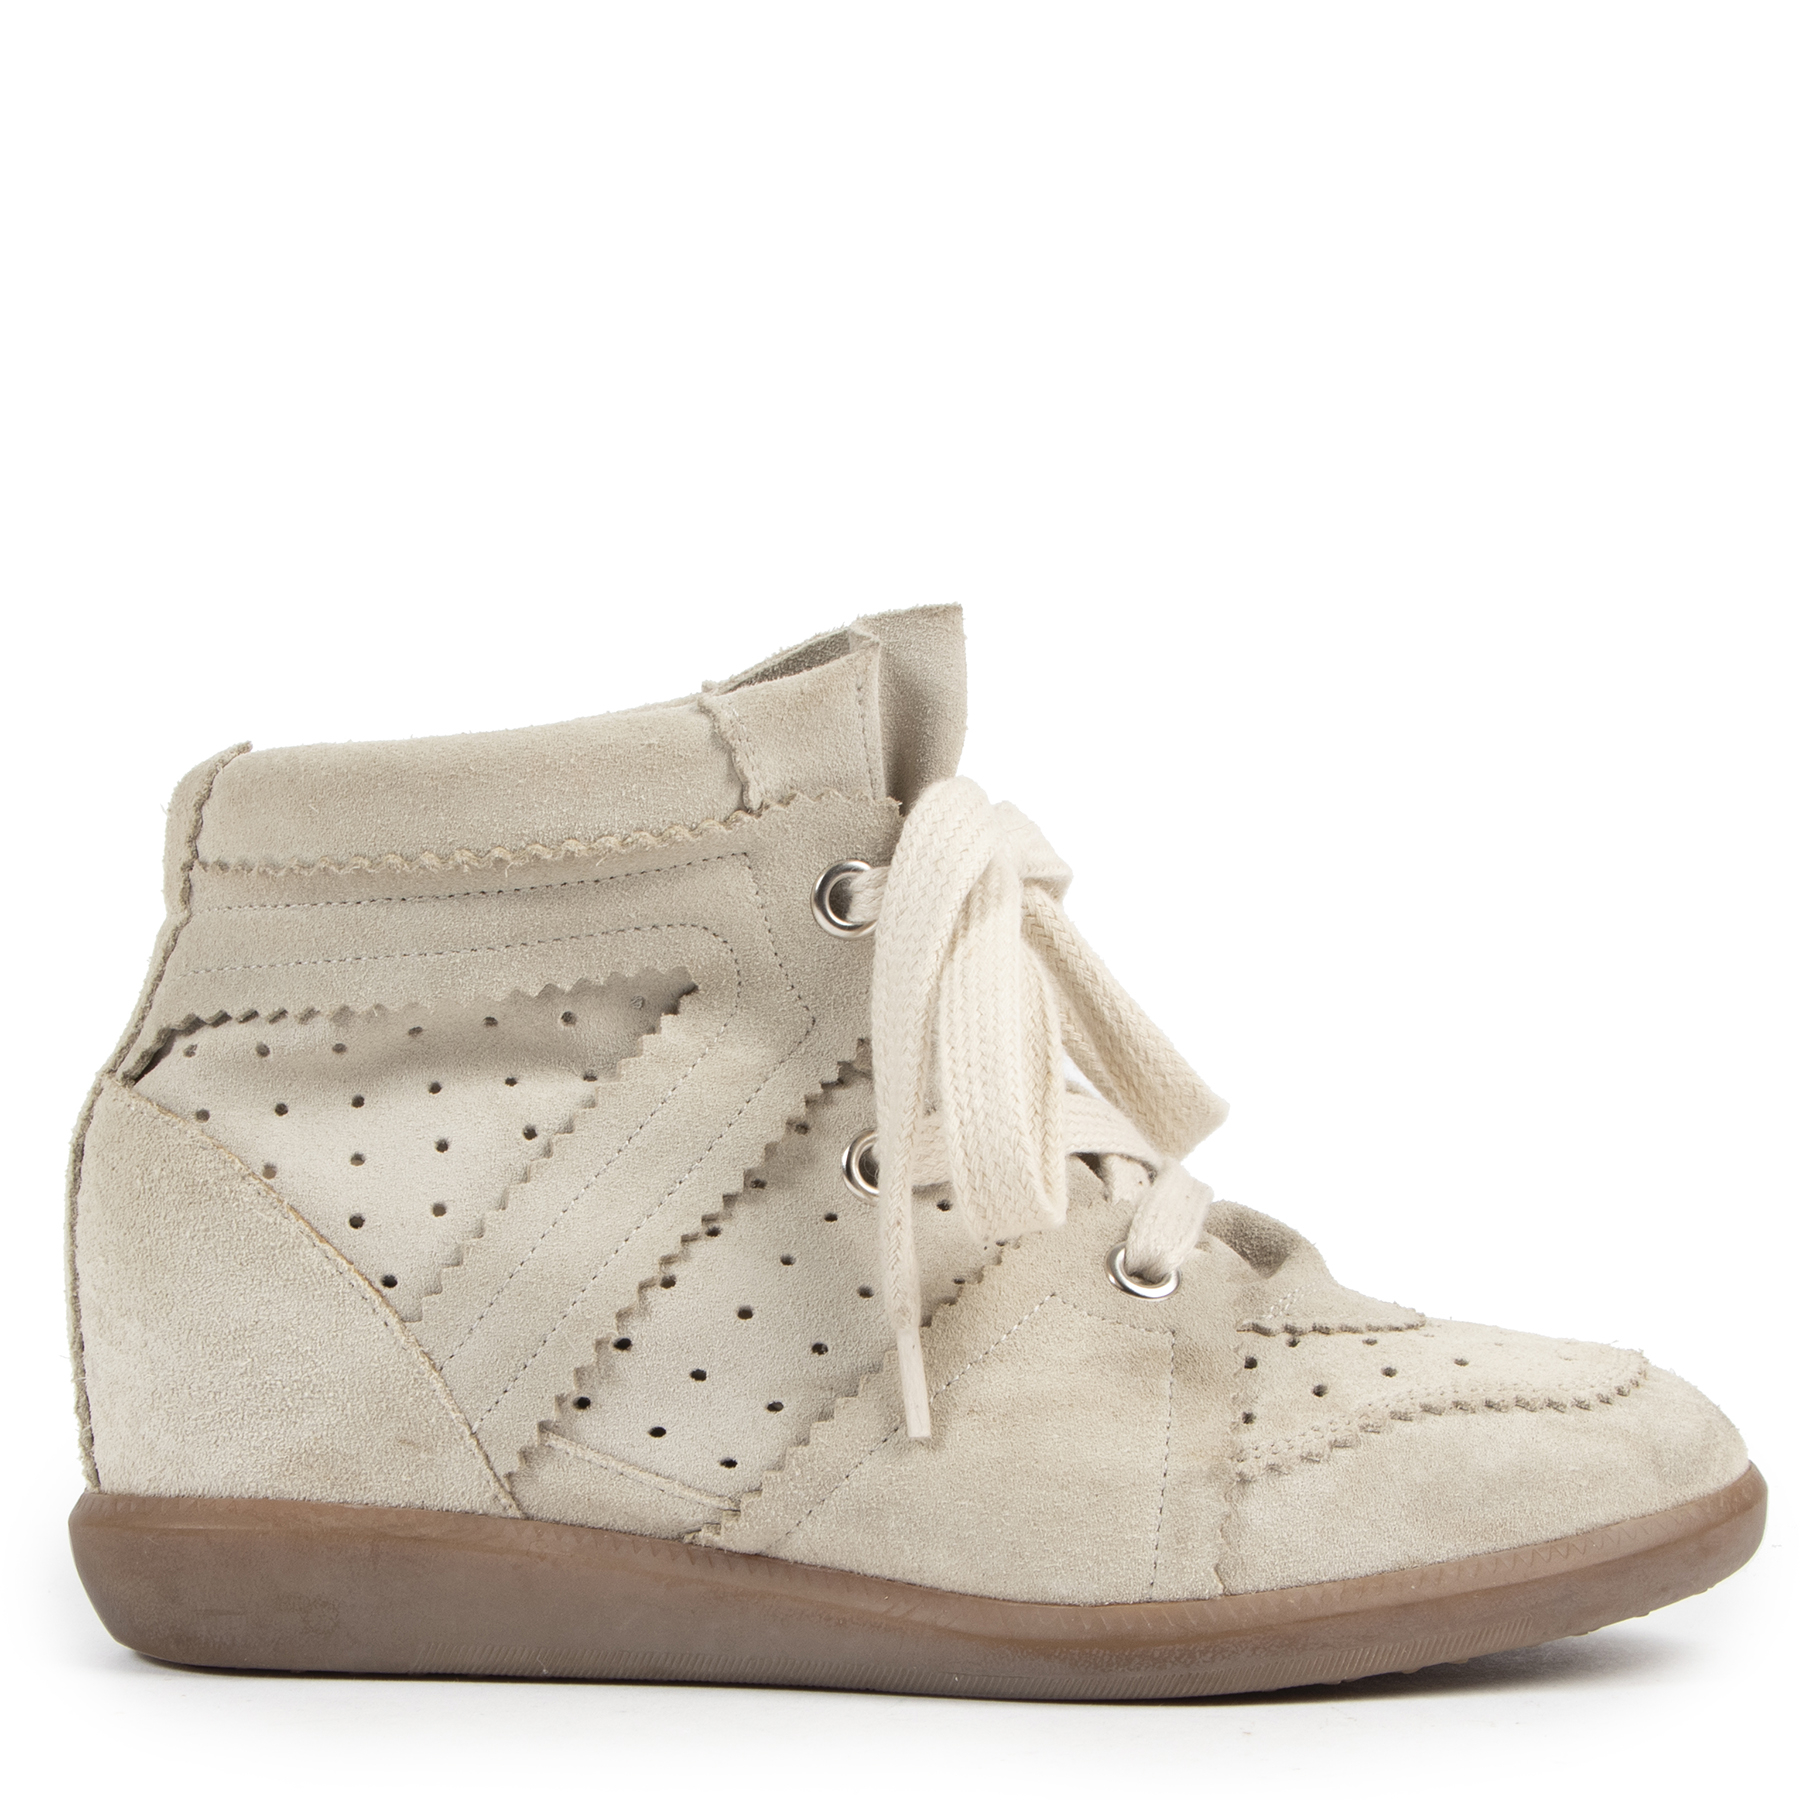 Isabel Marant Beige Suede Bobby Wedge Sneakers - Size 39 ○ ○ Buy and Sell Authentic Luxury